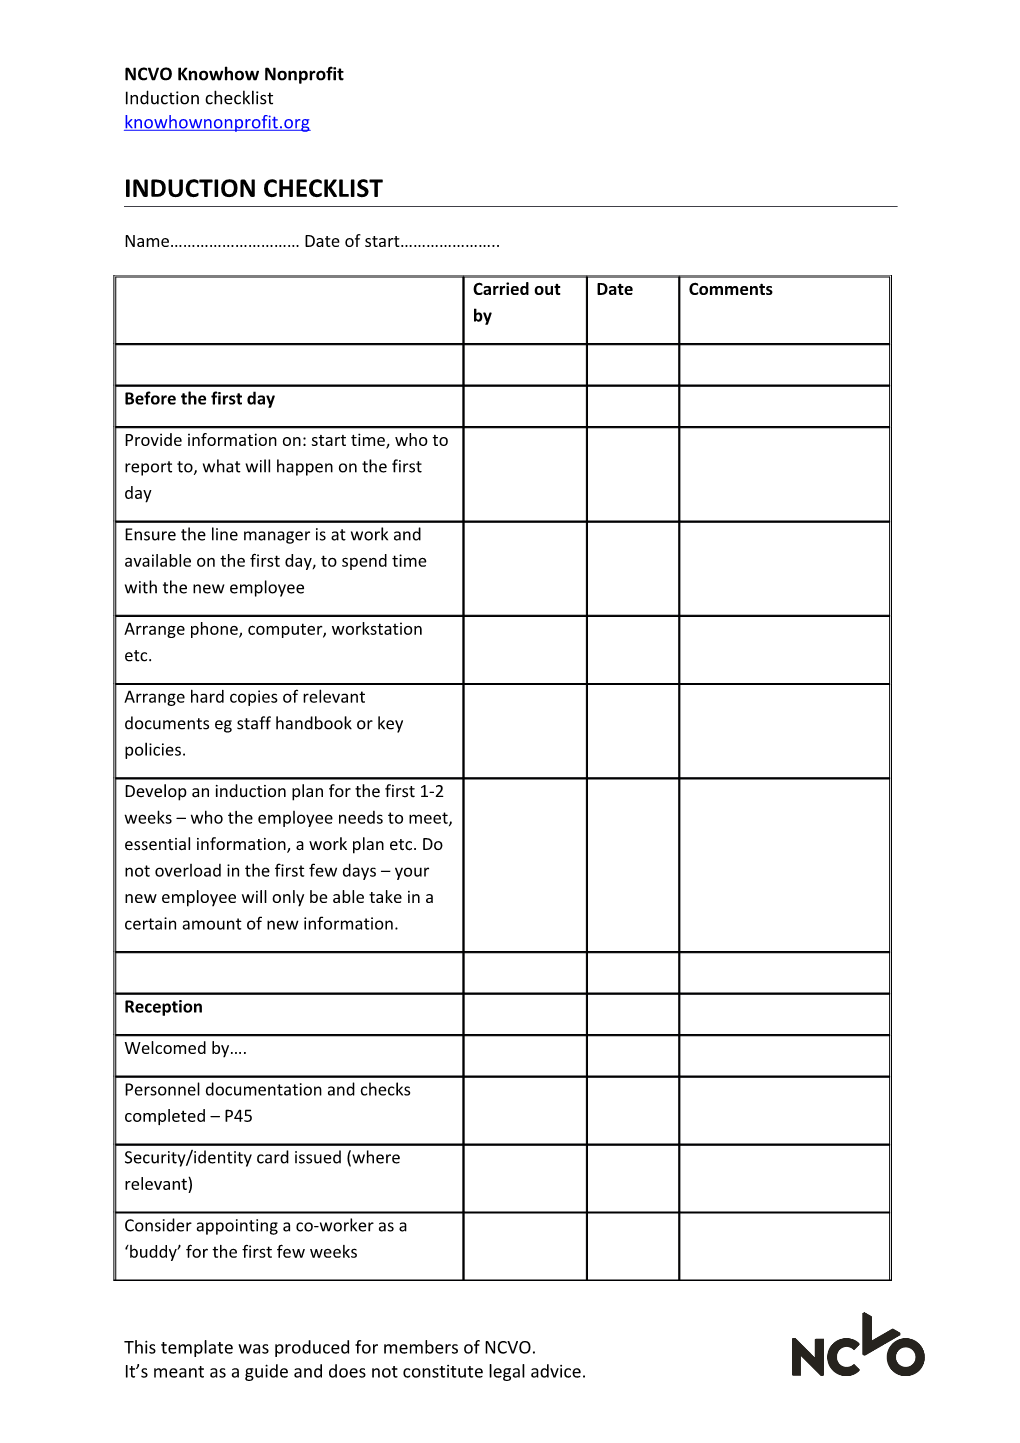 NCVO Knowhow Nonprofit Induction Checklist